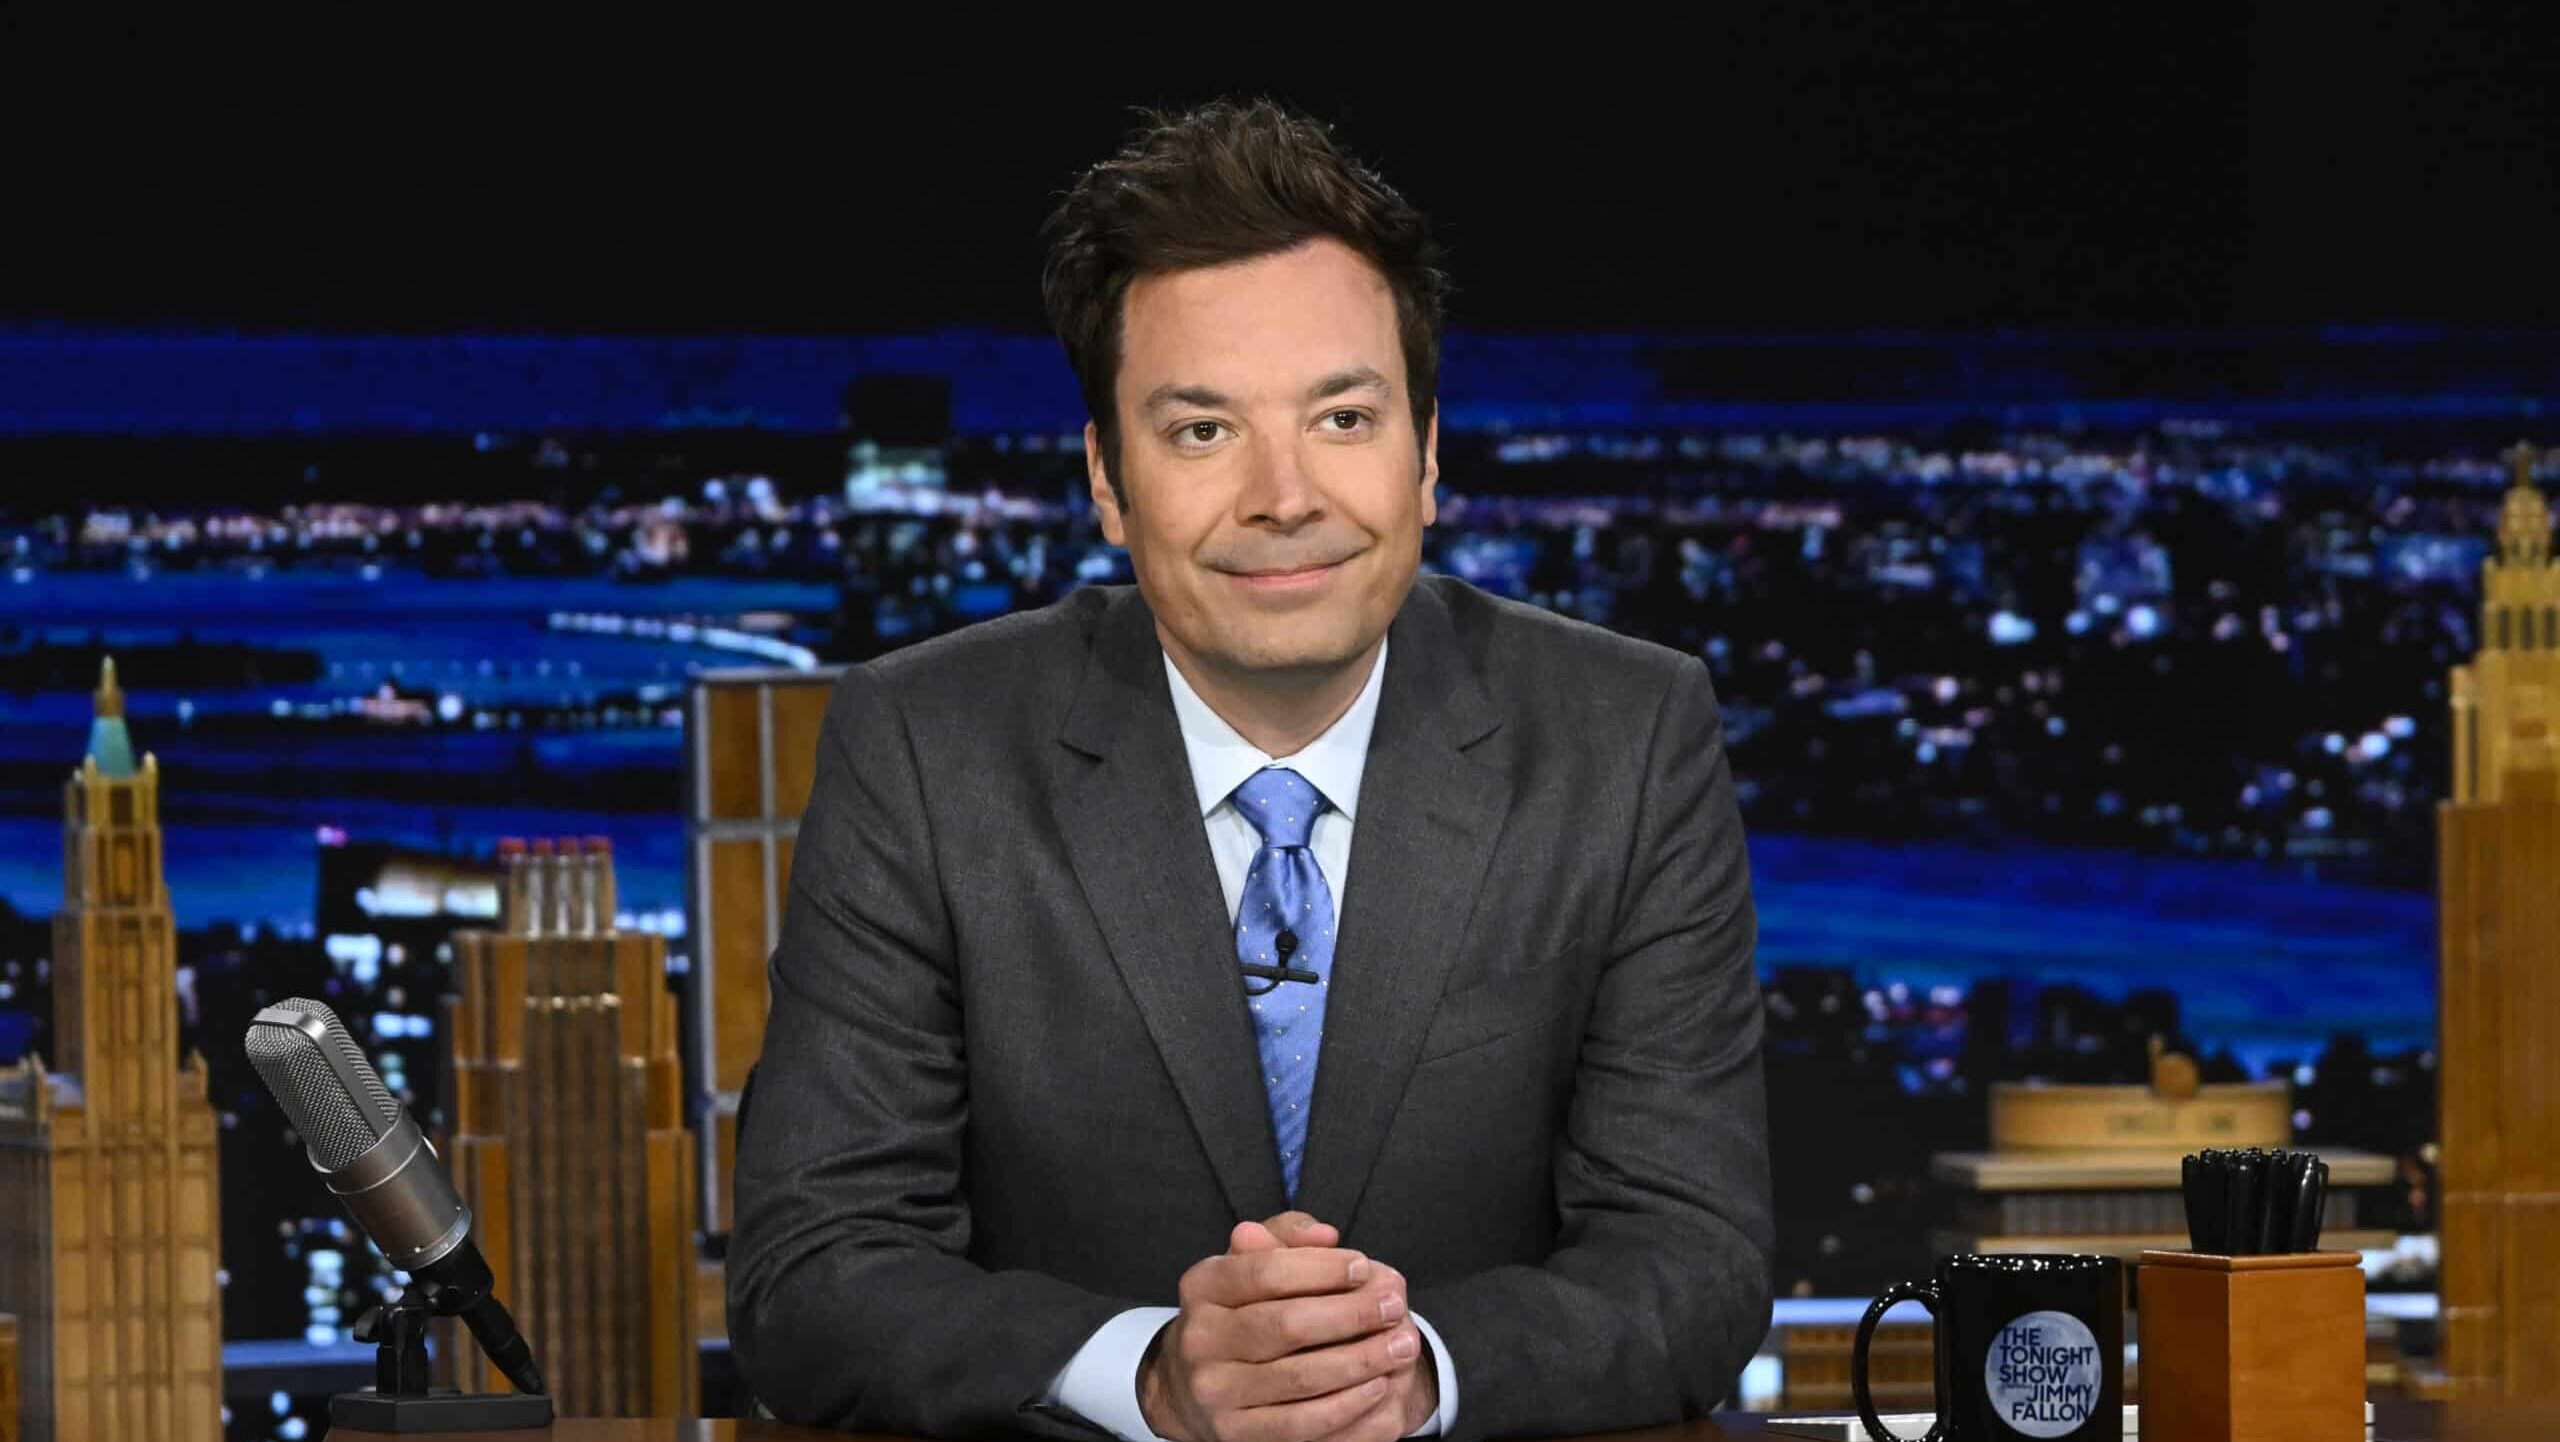 THE TONIGHT SHOW STARRING JIMMY FALLON -- Episode 1843 -- Pictured: Host Jimmy Fallon during chit-chat on Monday, May 1, 2023 --